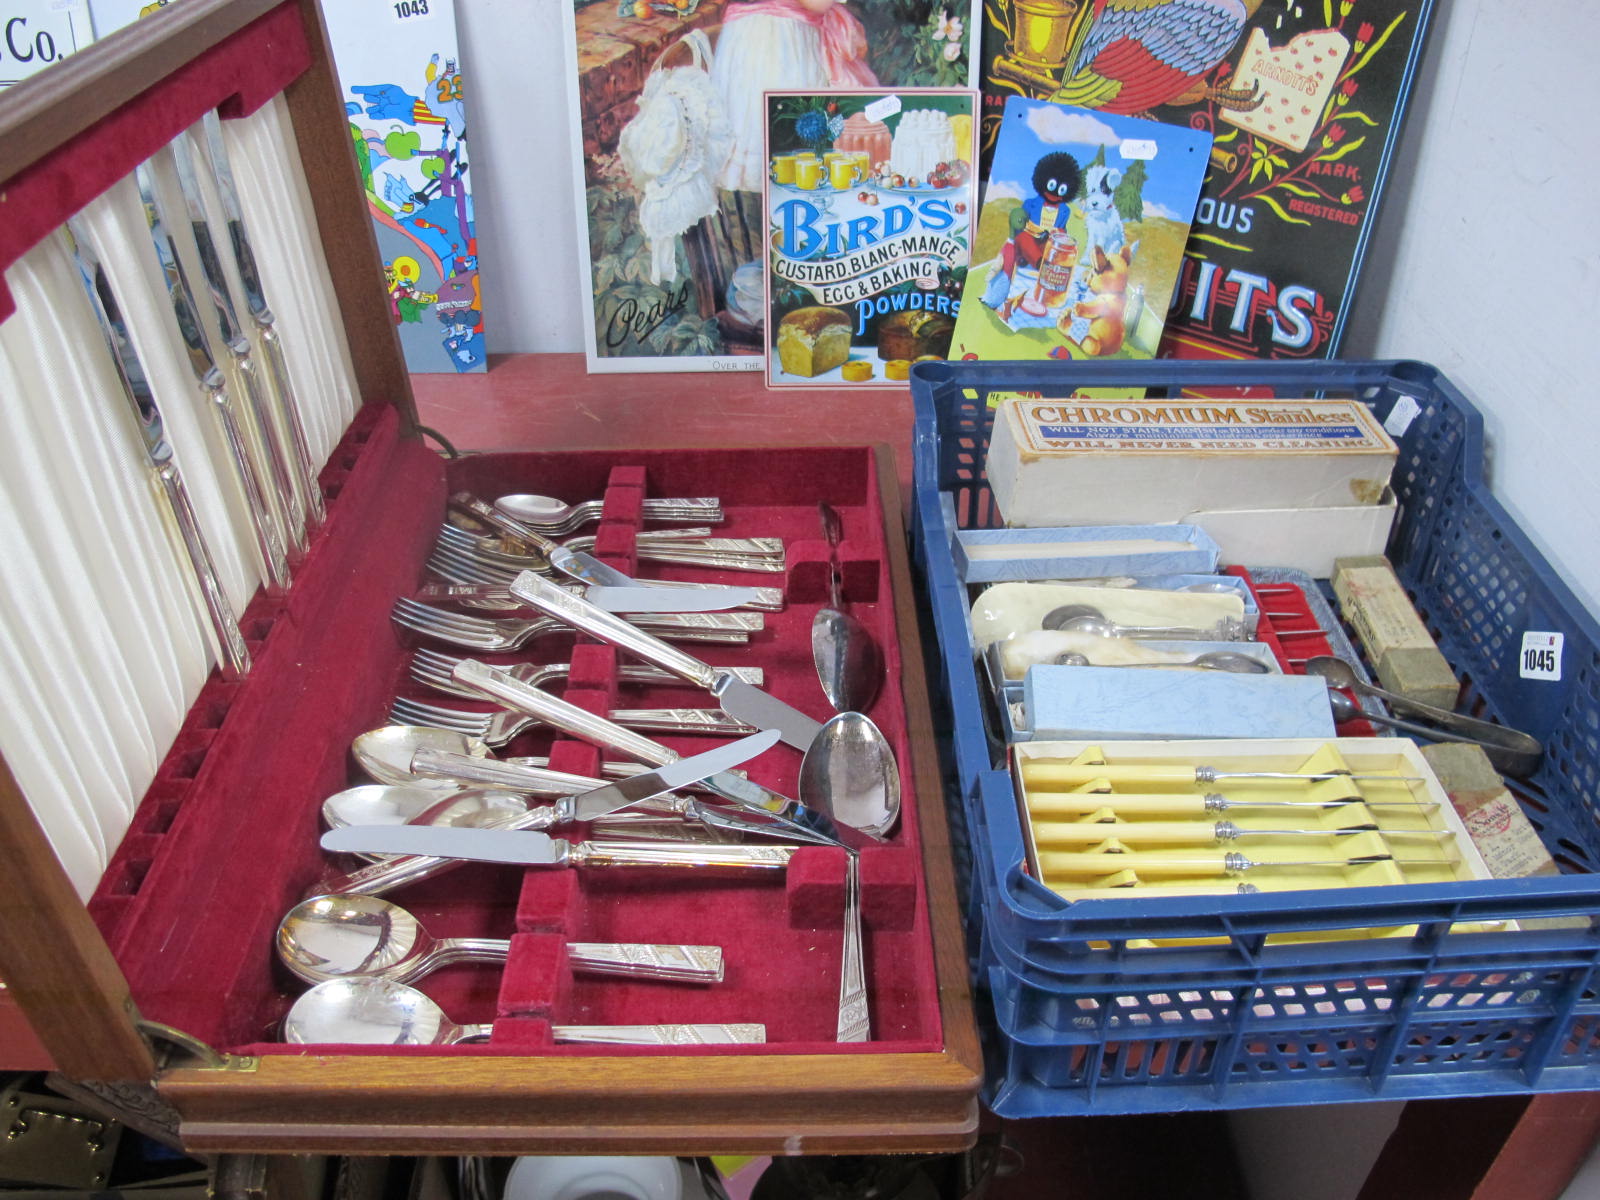 A Canteen of Viners Cutlery, cased cutlery.